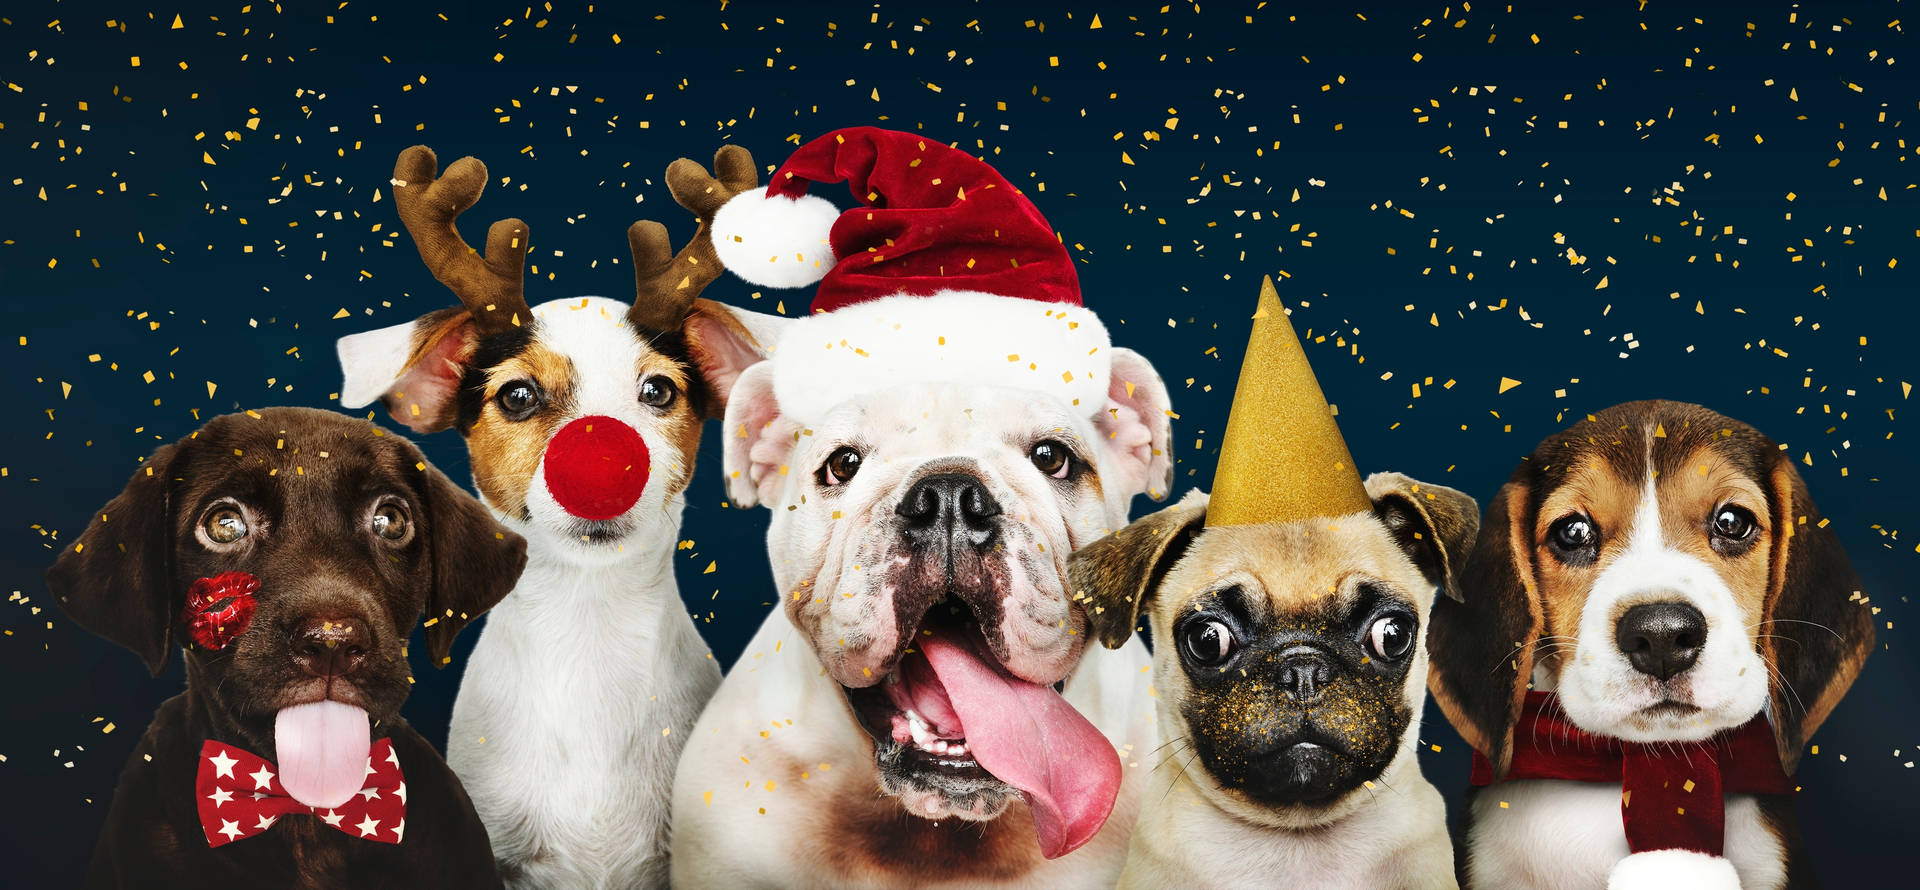 Dogs Christmas Party Background Wallpaper